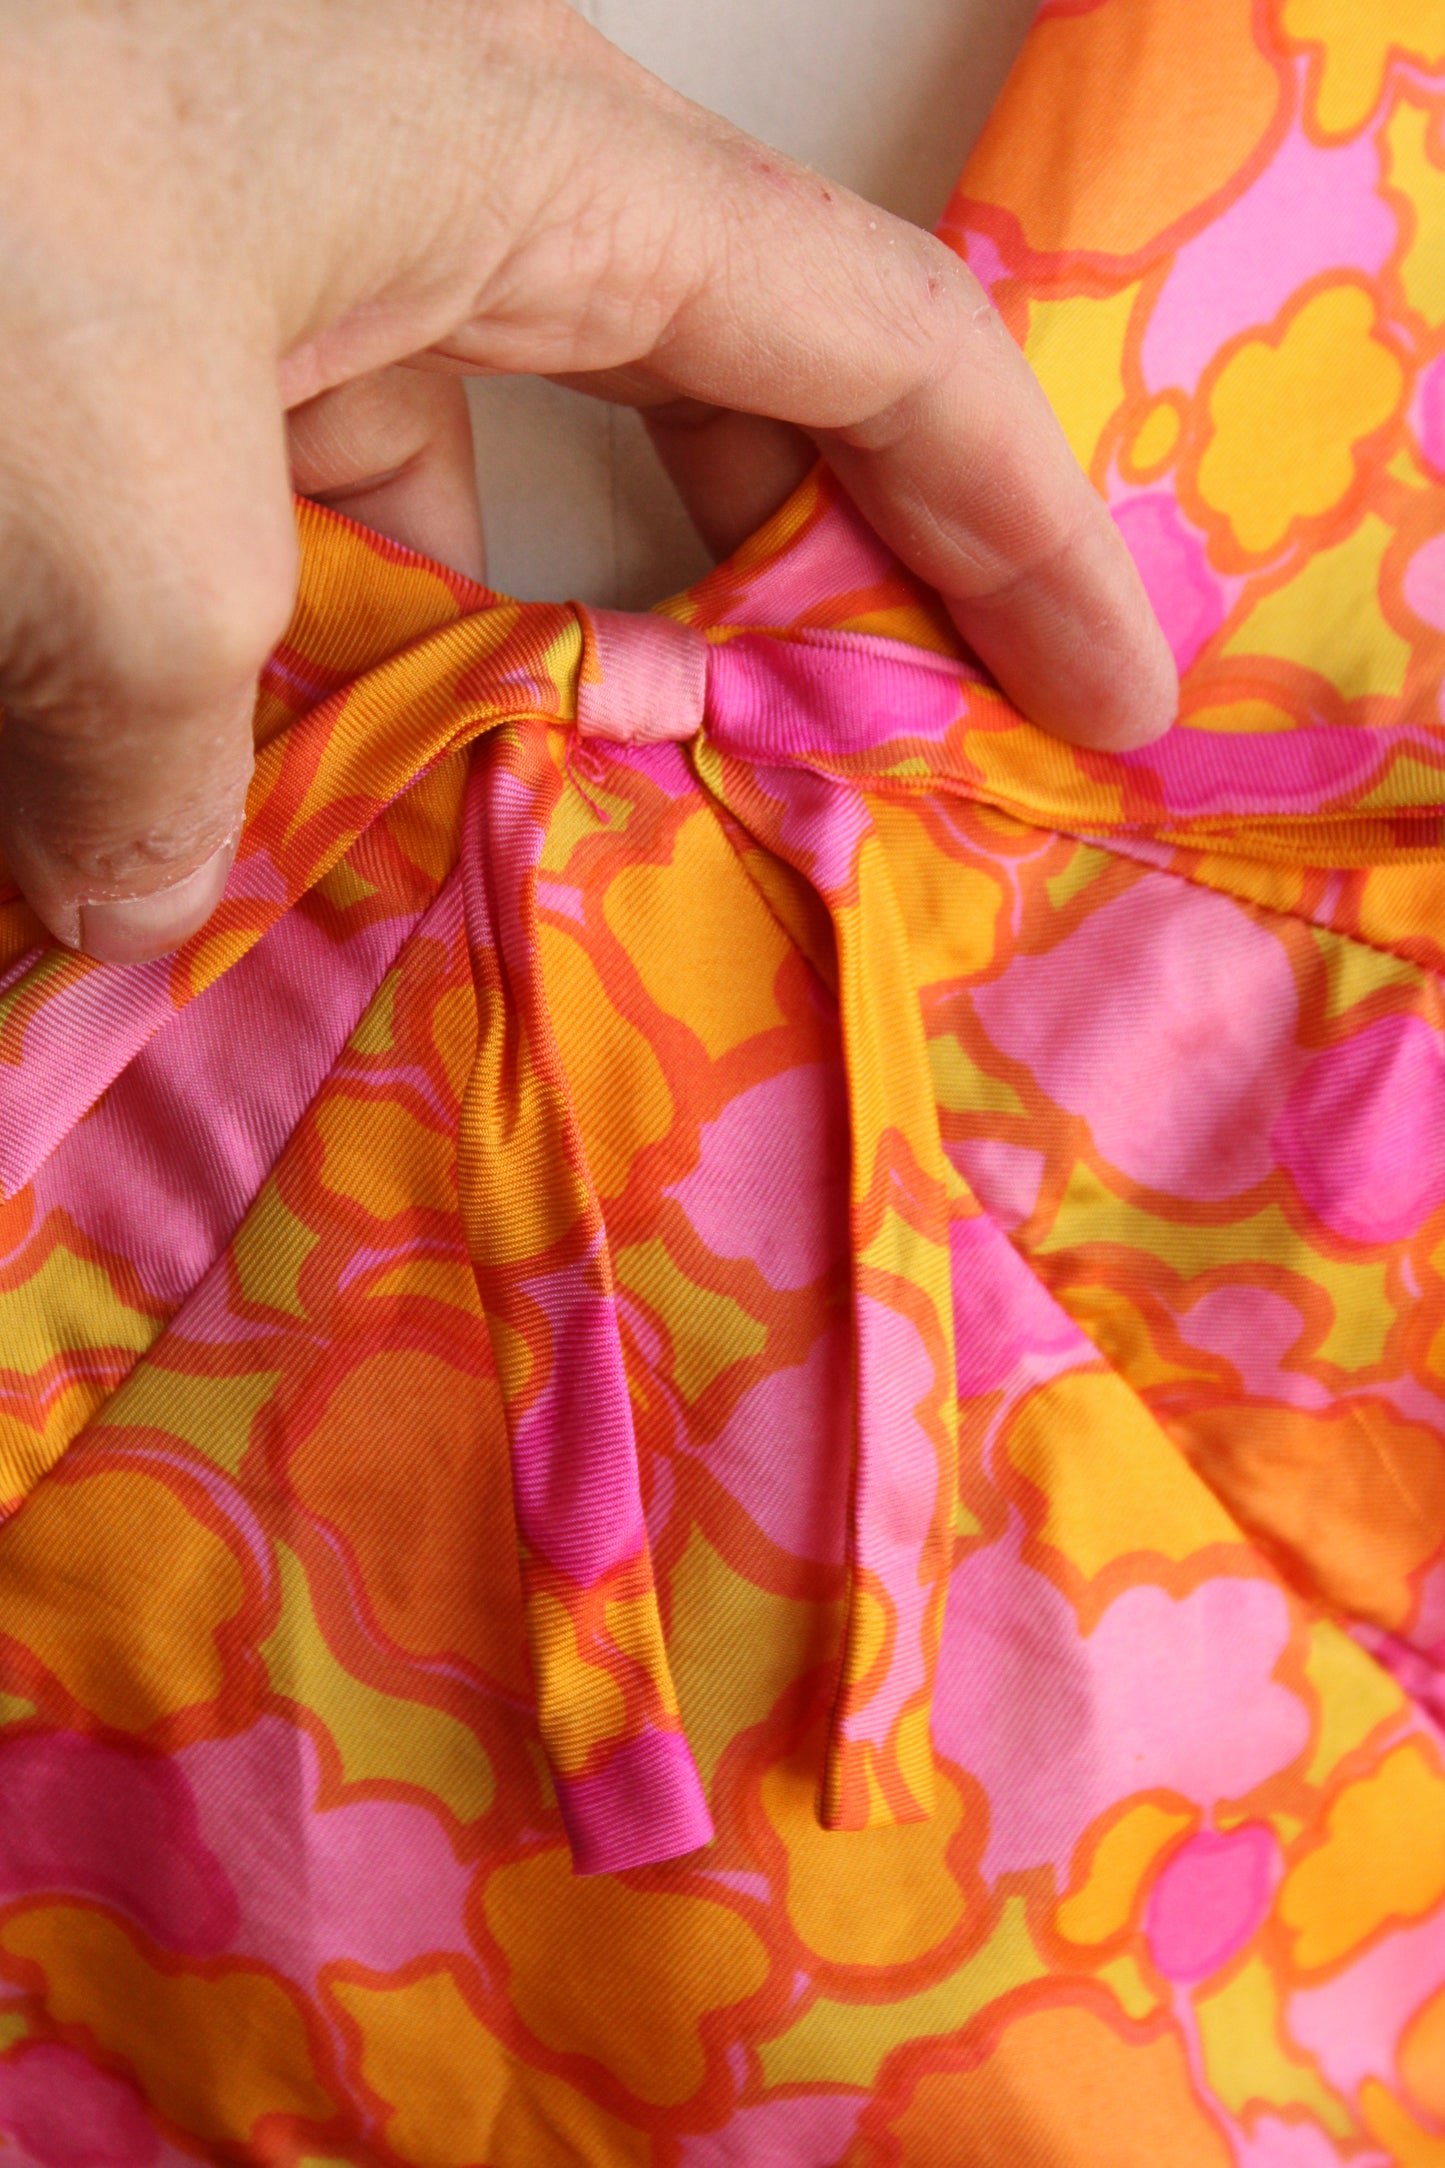 Vintage 1960s Silk Dress in Pink and Orange With a Bow